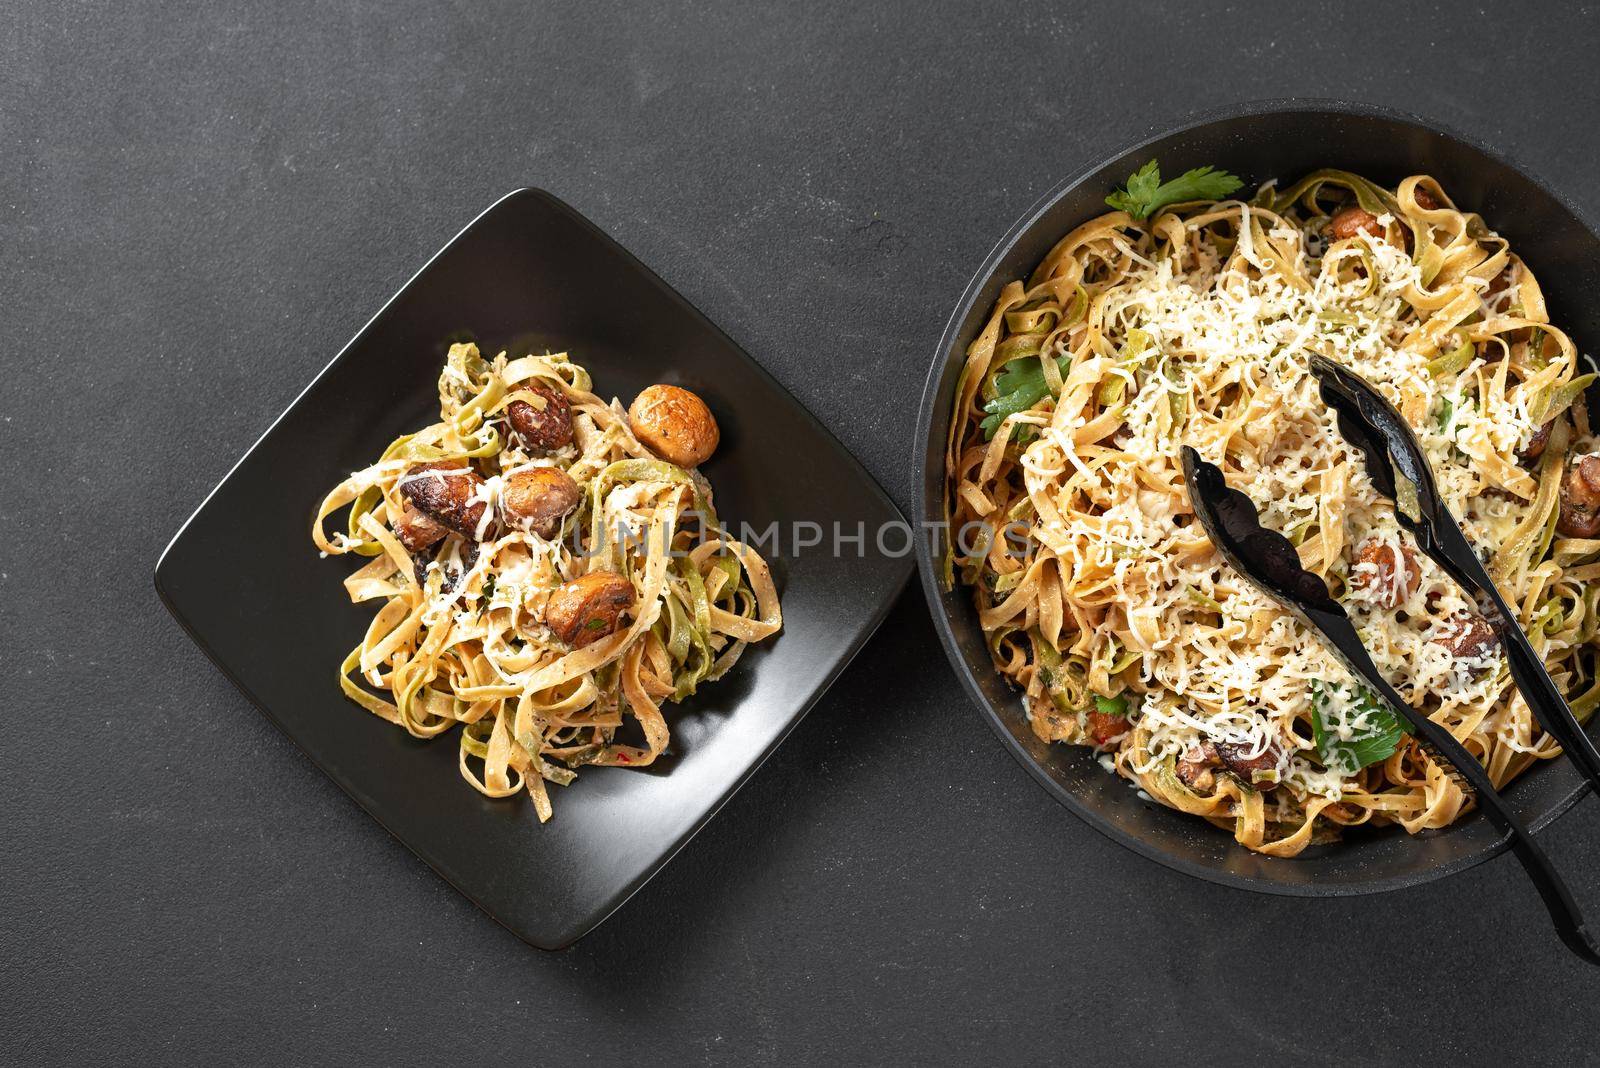 alfredo pasta with mushrooms in cream sauce on a black plate on a dark background. Freshly cooked pasta in a cast-iron skillet. Next to the plate with pasta is a classic Italian dish of fettuccini pasta. by gulyaevstudio